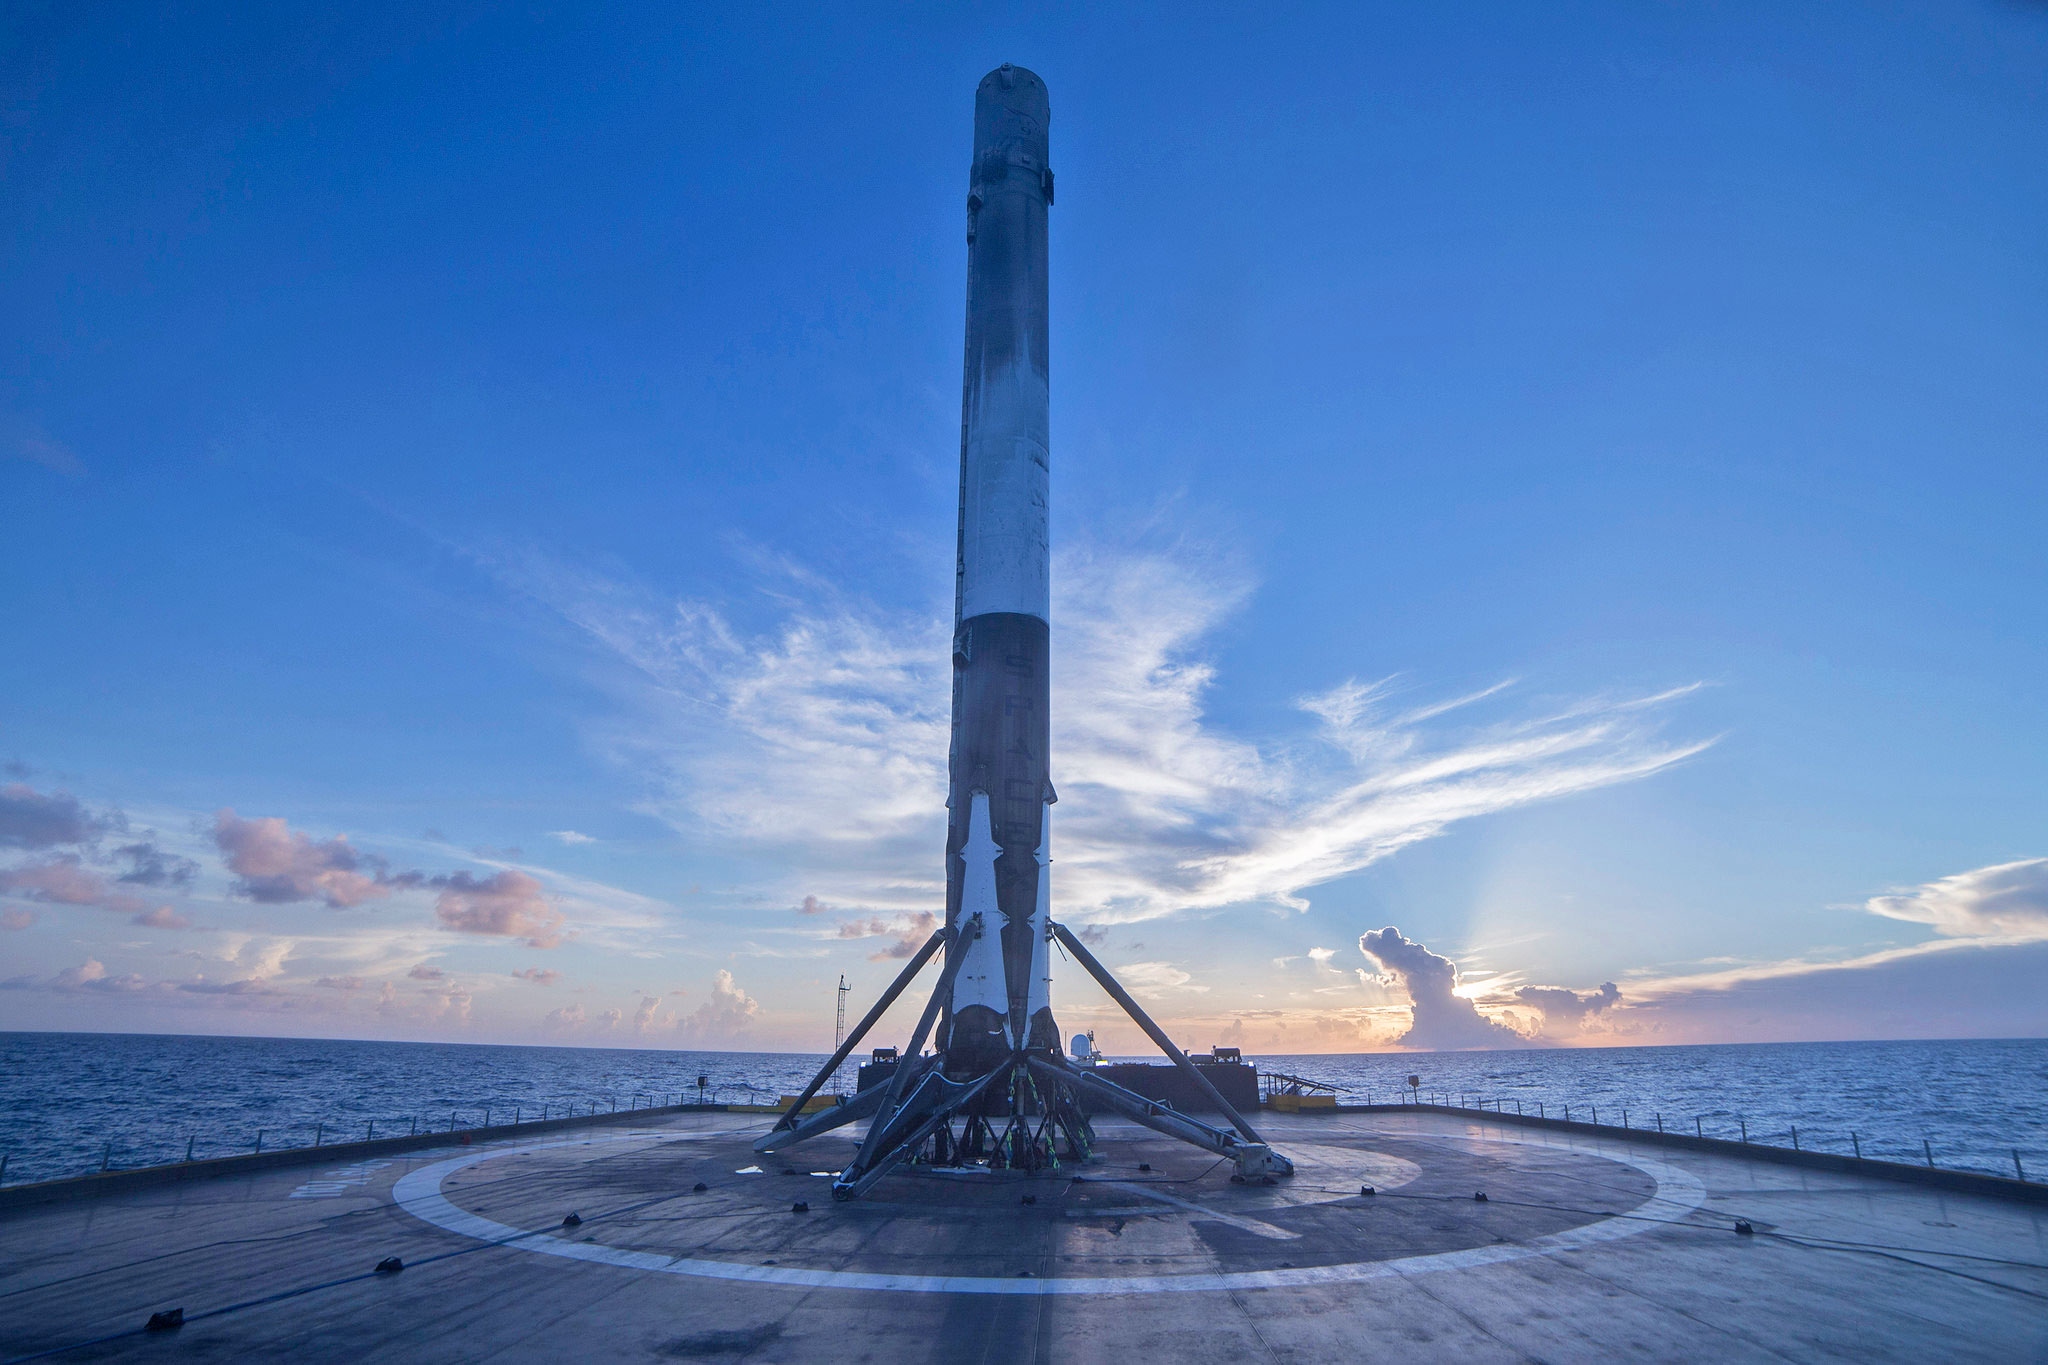 SpaceX to launch SES satellite on a reused Falcon 9 rocket2048 x 1365